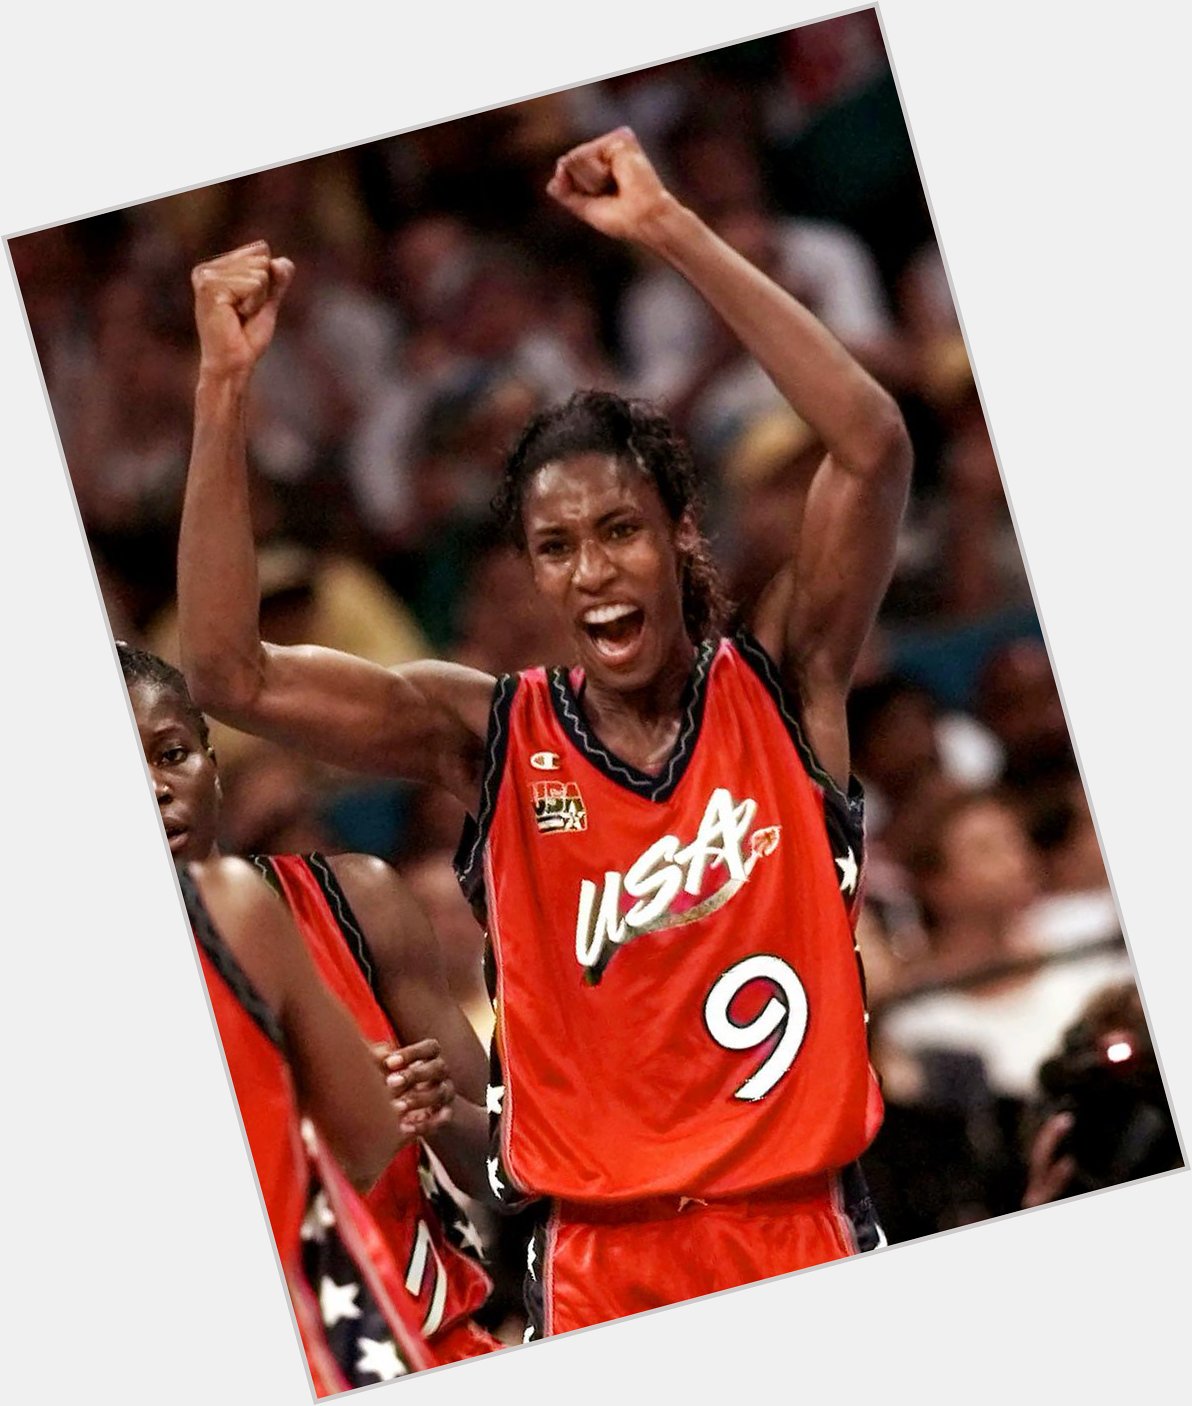 Happy Birthday Lisa Leslie who was born on July 7, 1972

Sports history July:  